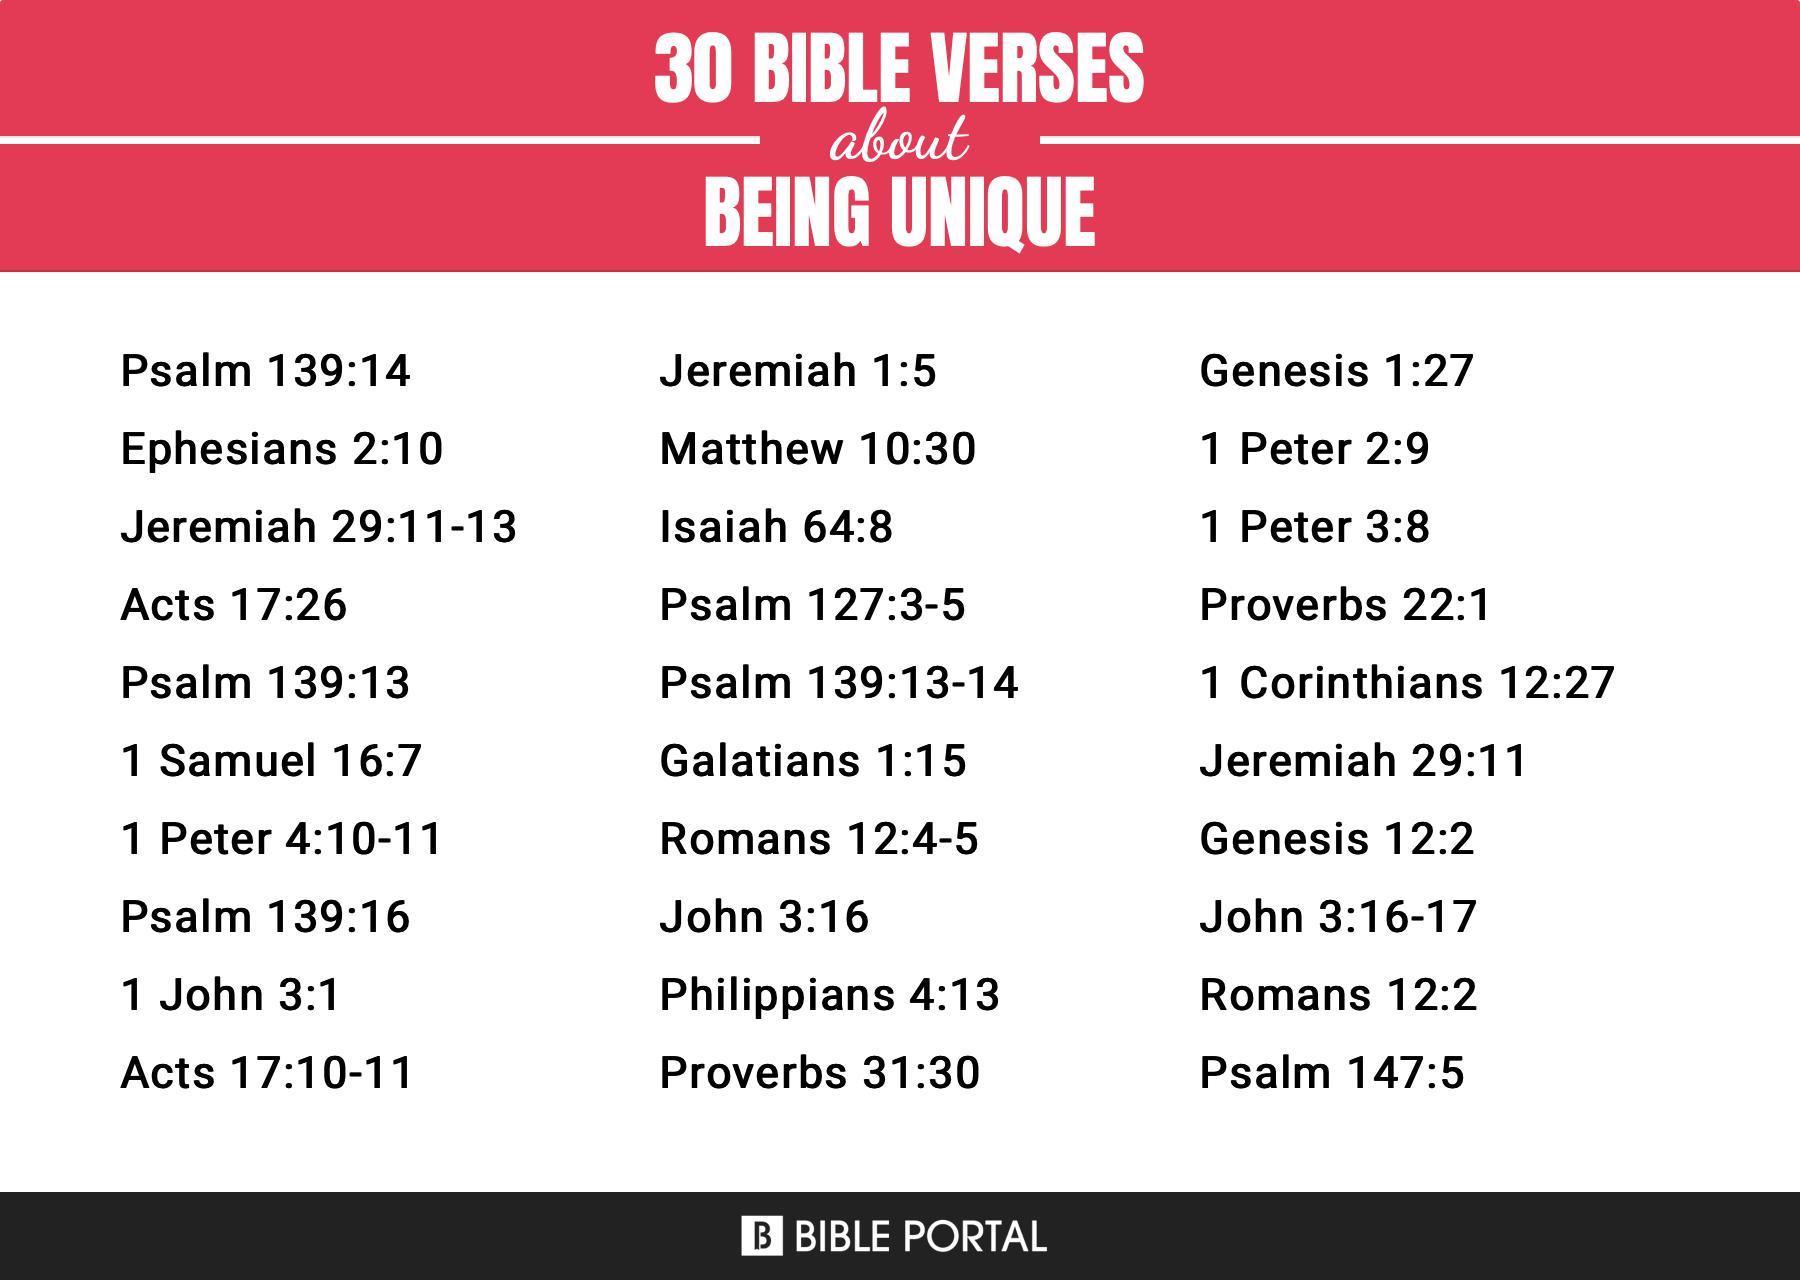 62 Bible Verses about Being Unique